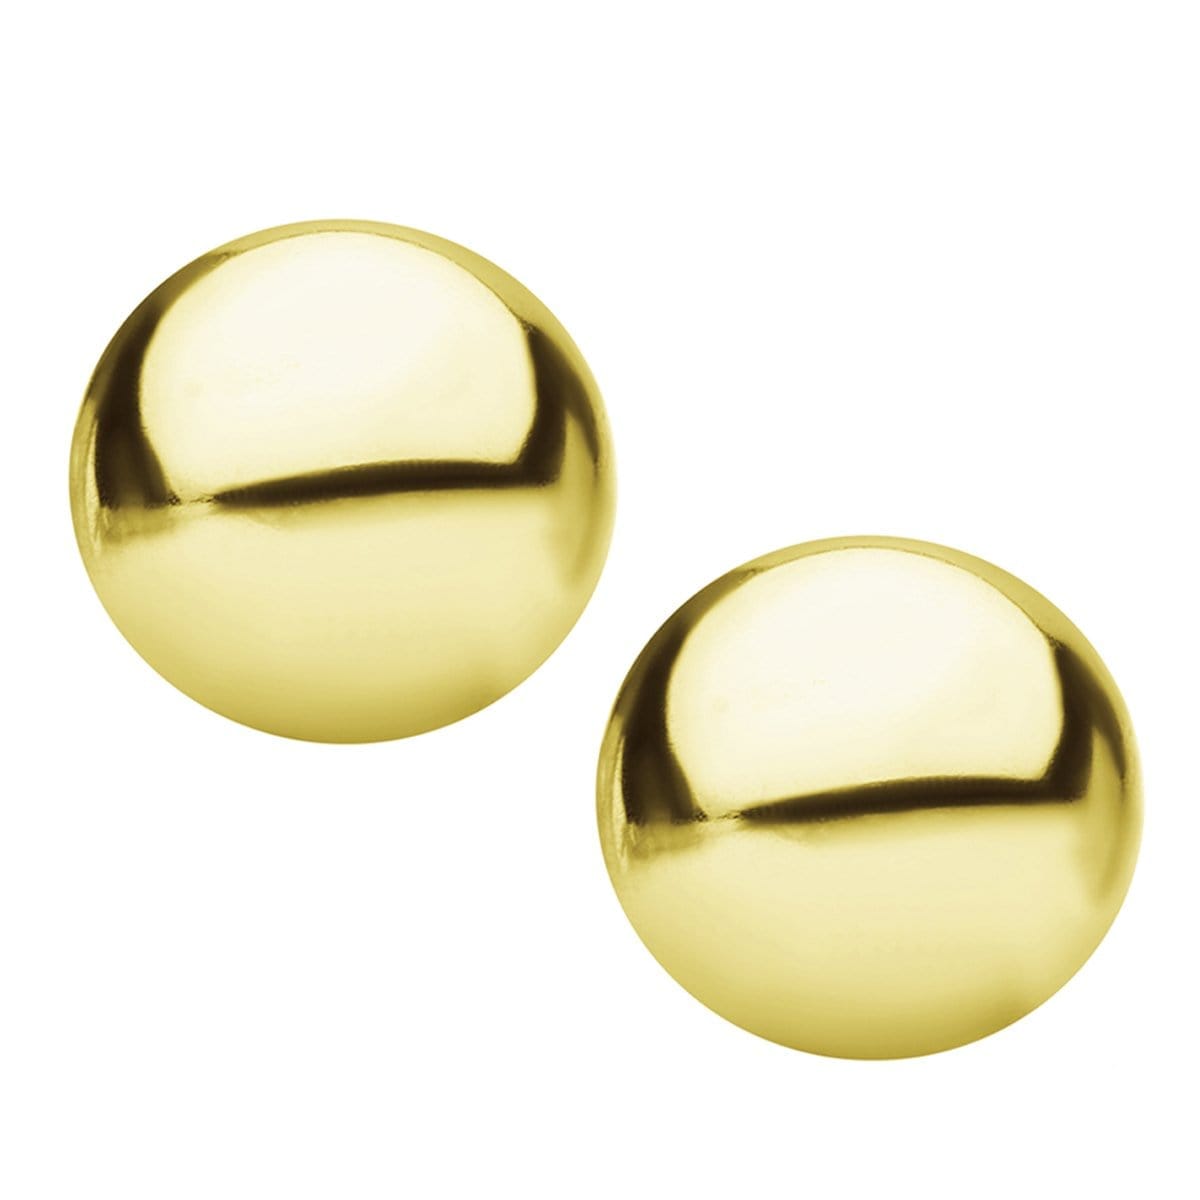 INOX JEWELRY Earrings Golden Tone Stainless Steel Small Round Dome Studs SSE4710G